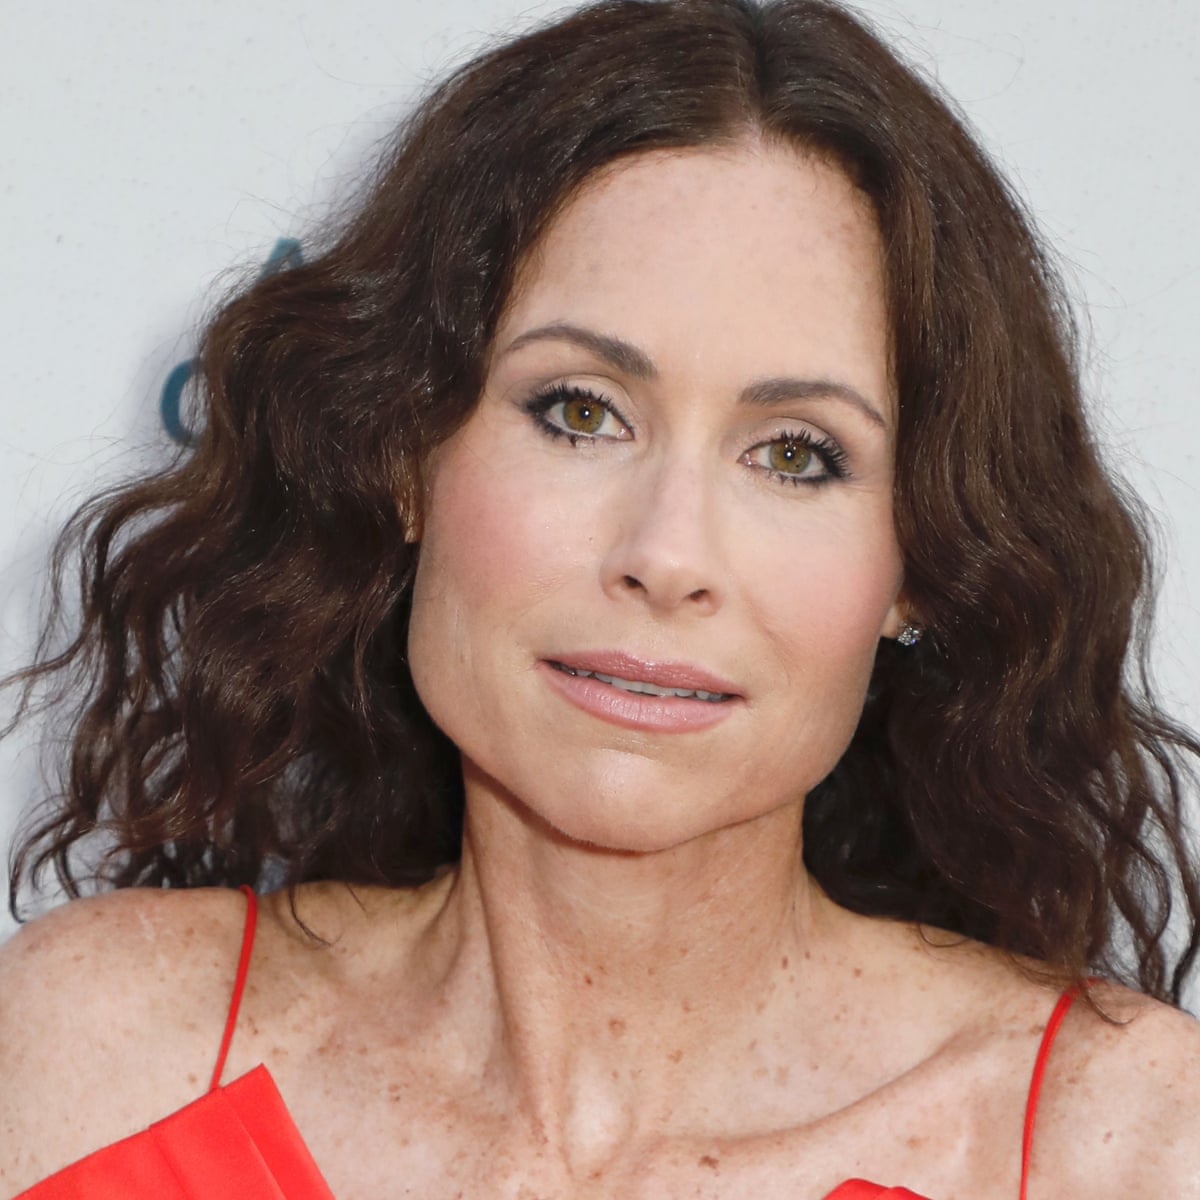 Driver minnie images of Minnie Driver